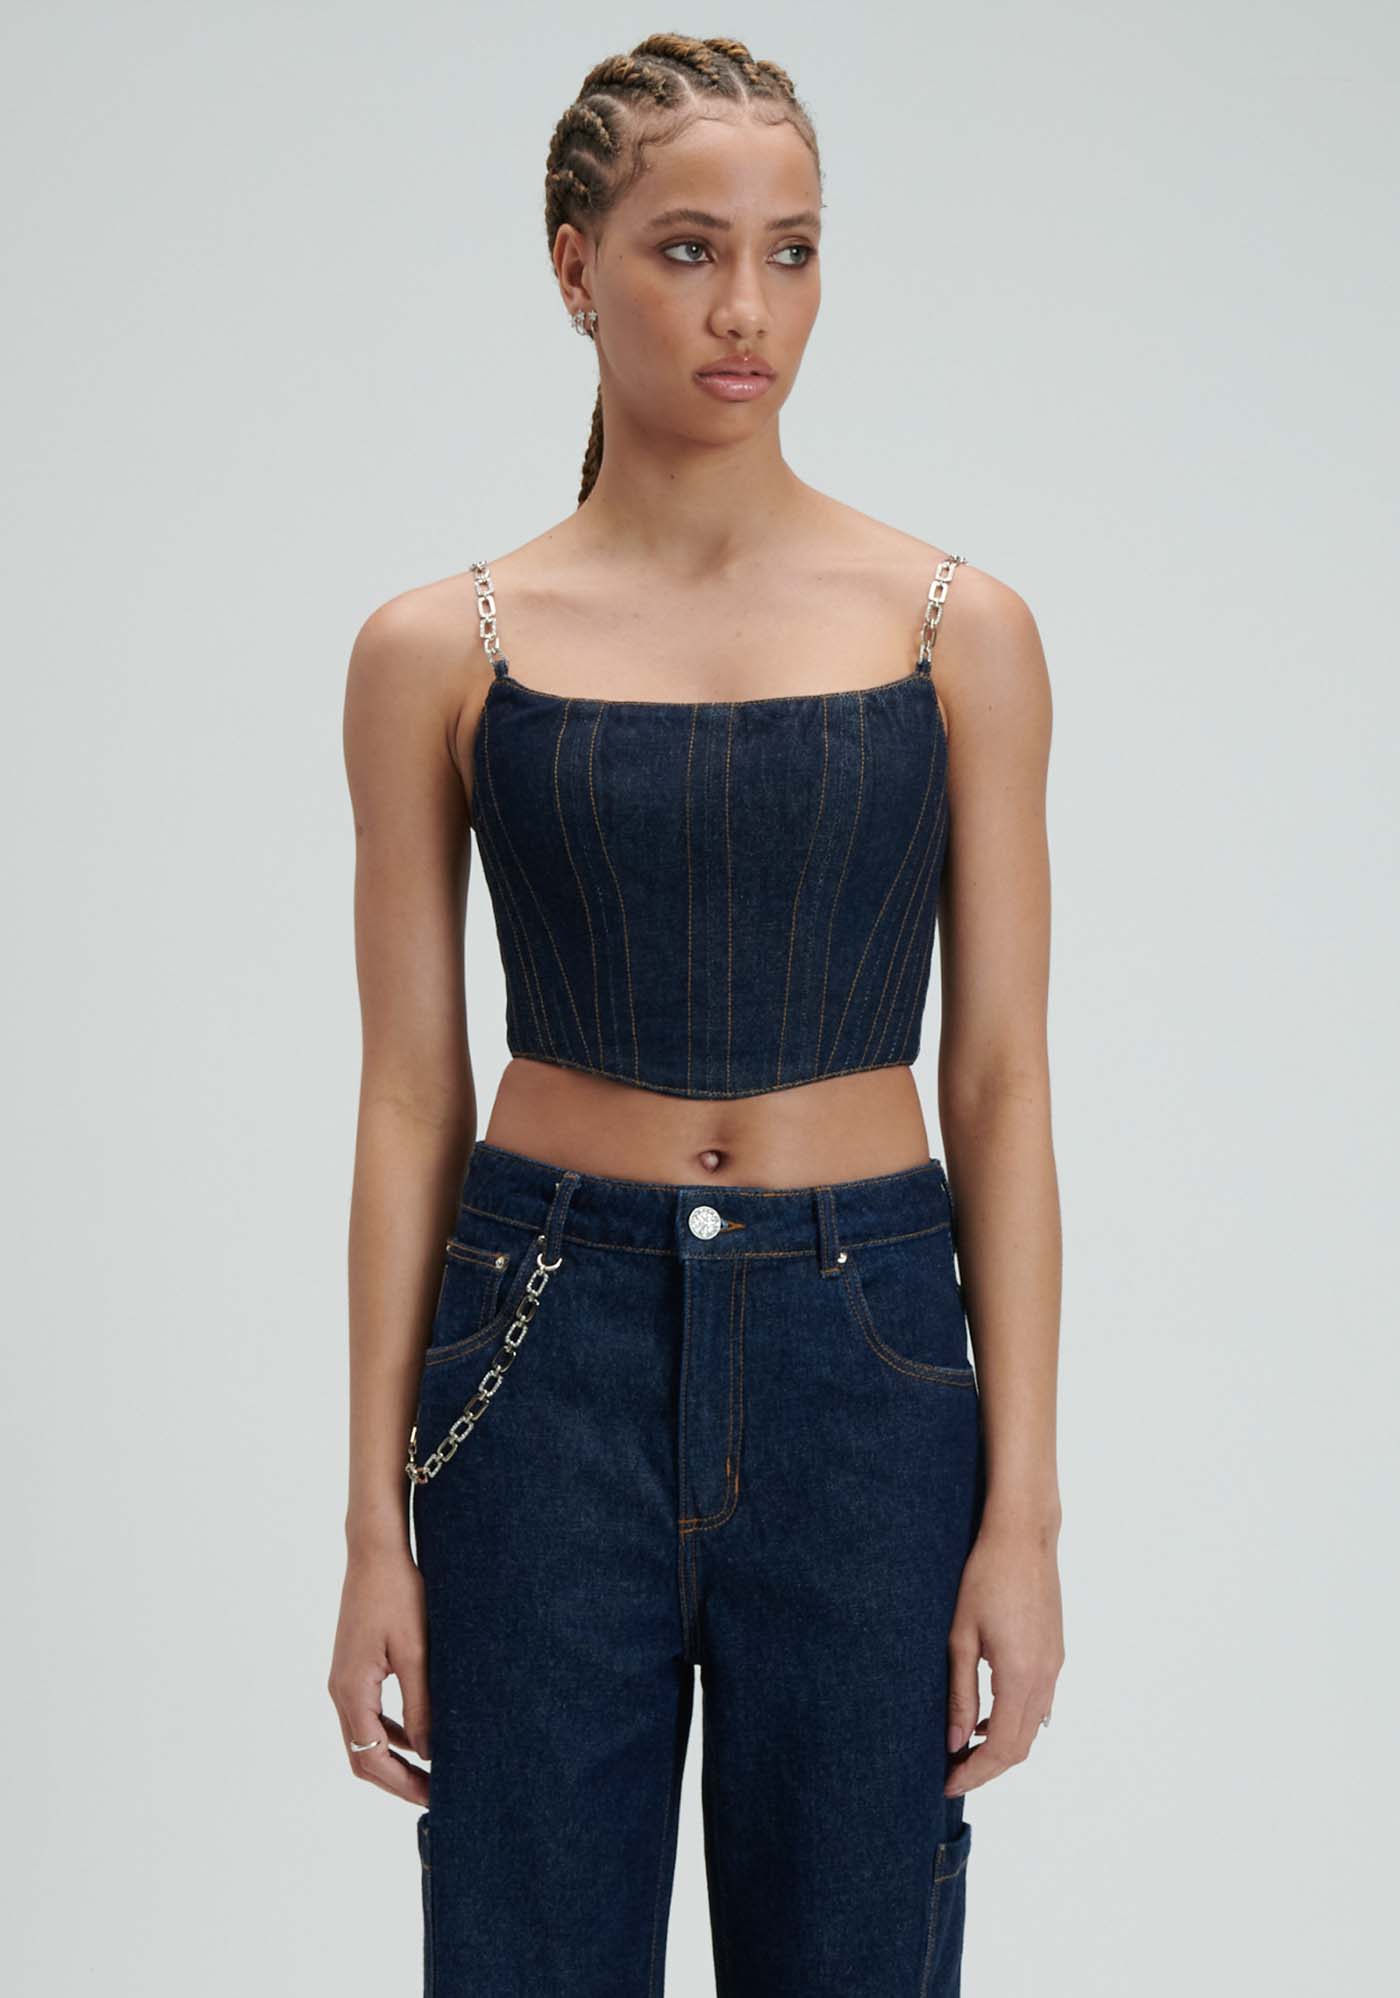 Top Corset Jeans Tomara que Caia - My Favorite Things